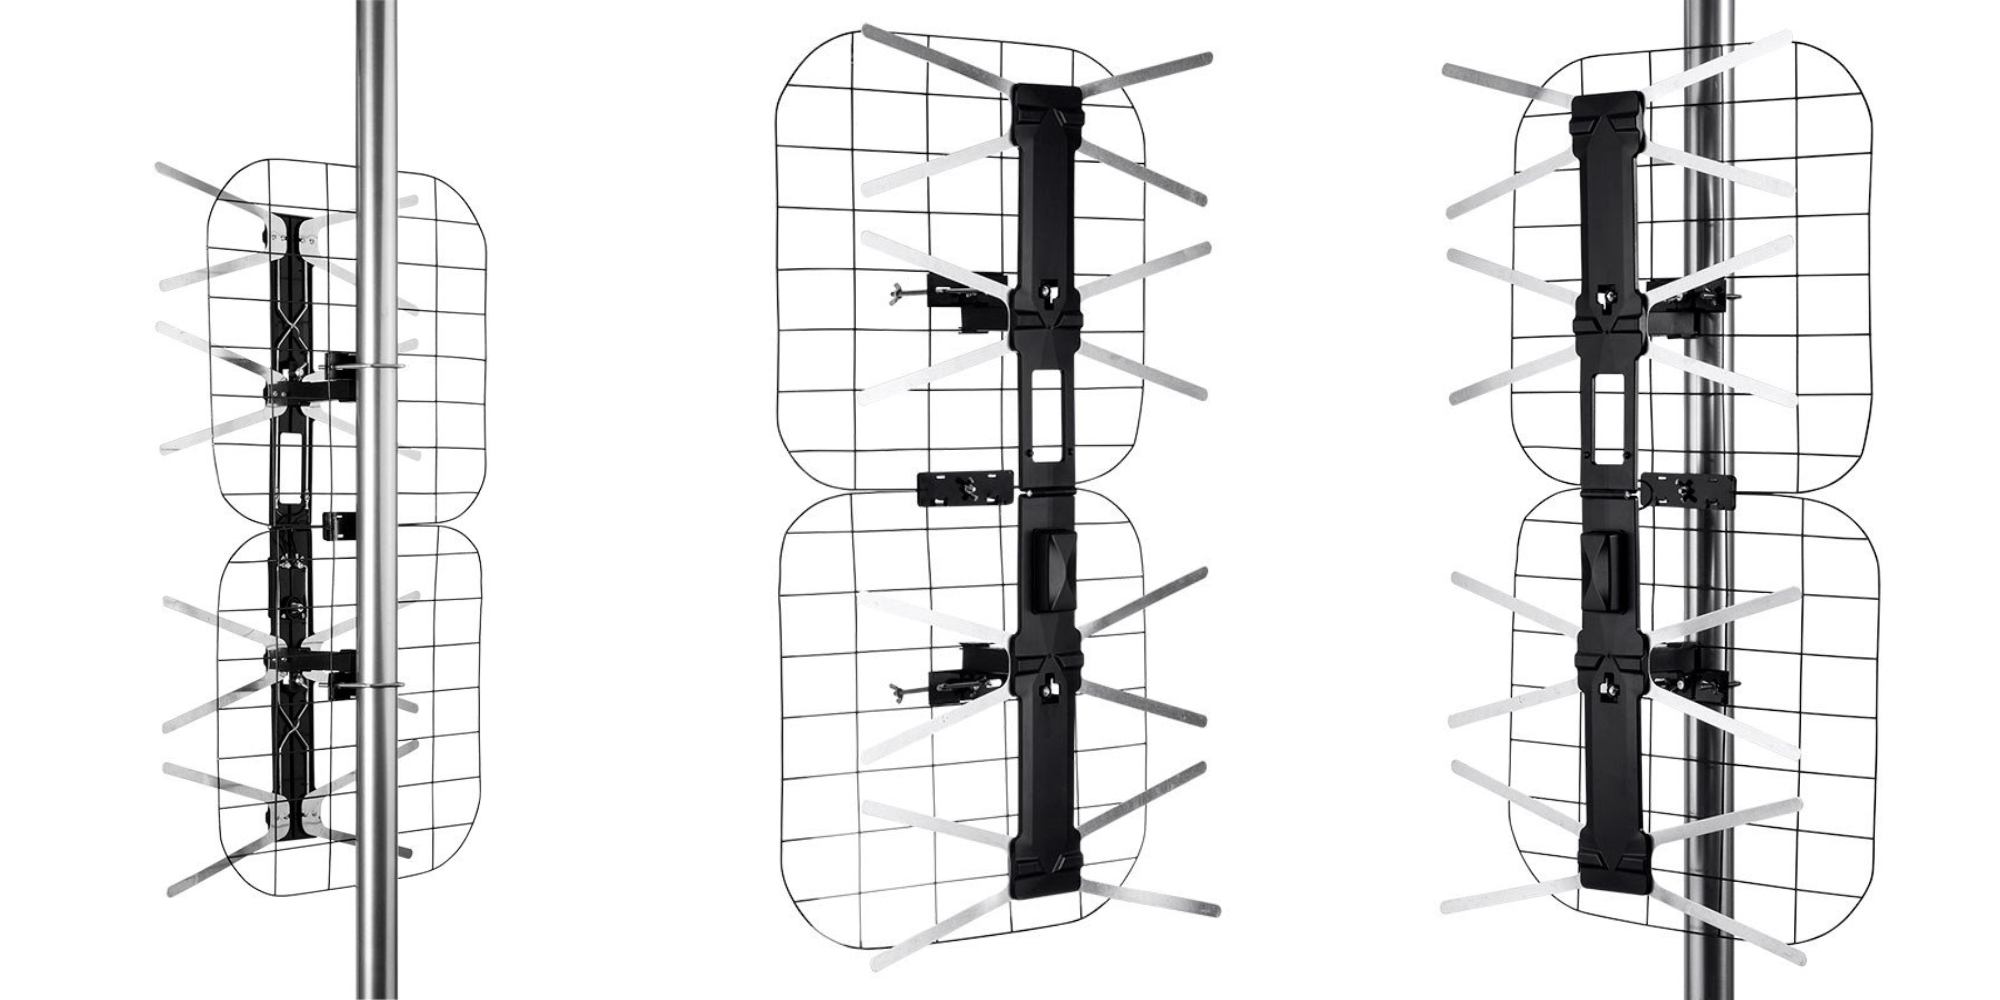 https://9to5toys.com/wp-content/uploads/sites/5/2019/06/Monoprice-Foldable-Long-Range-HD8-Outdoor-HDTV-Antenna.png